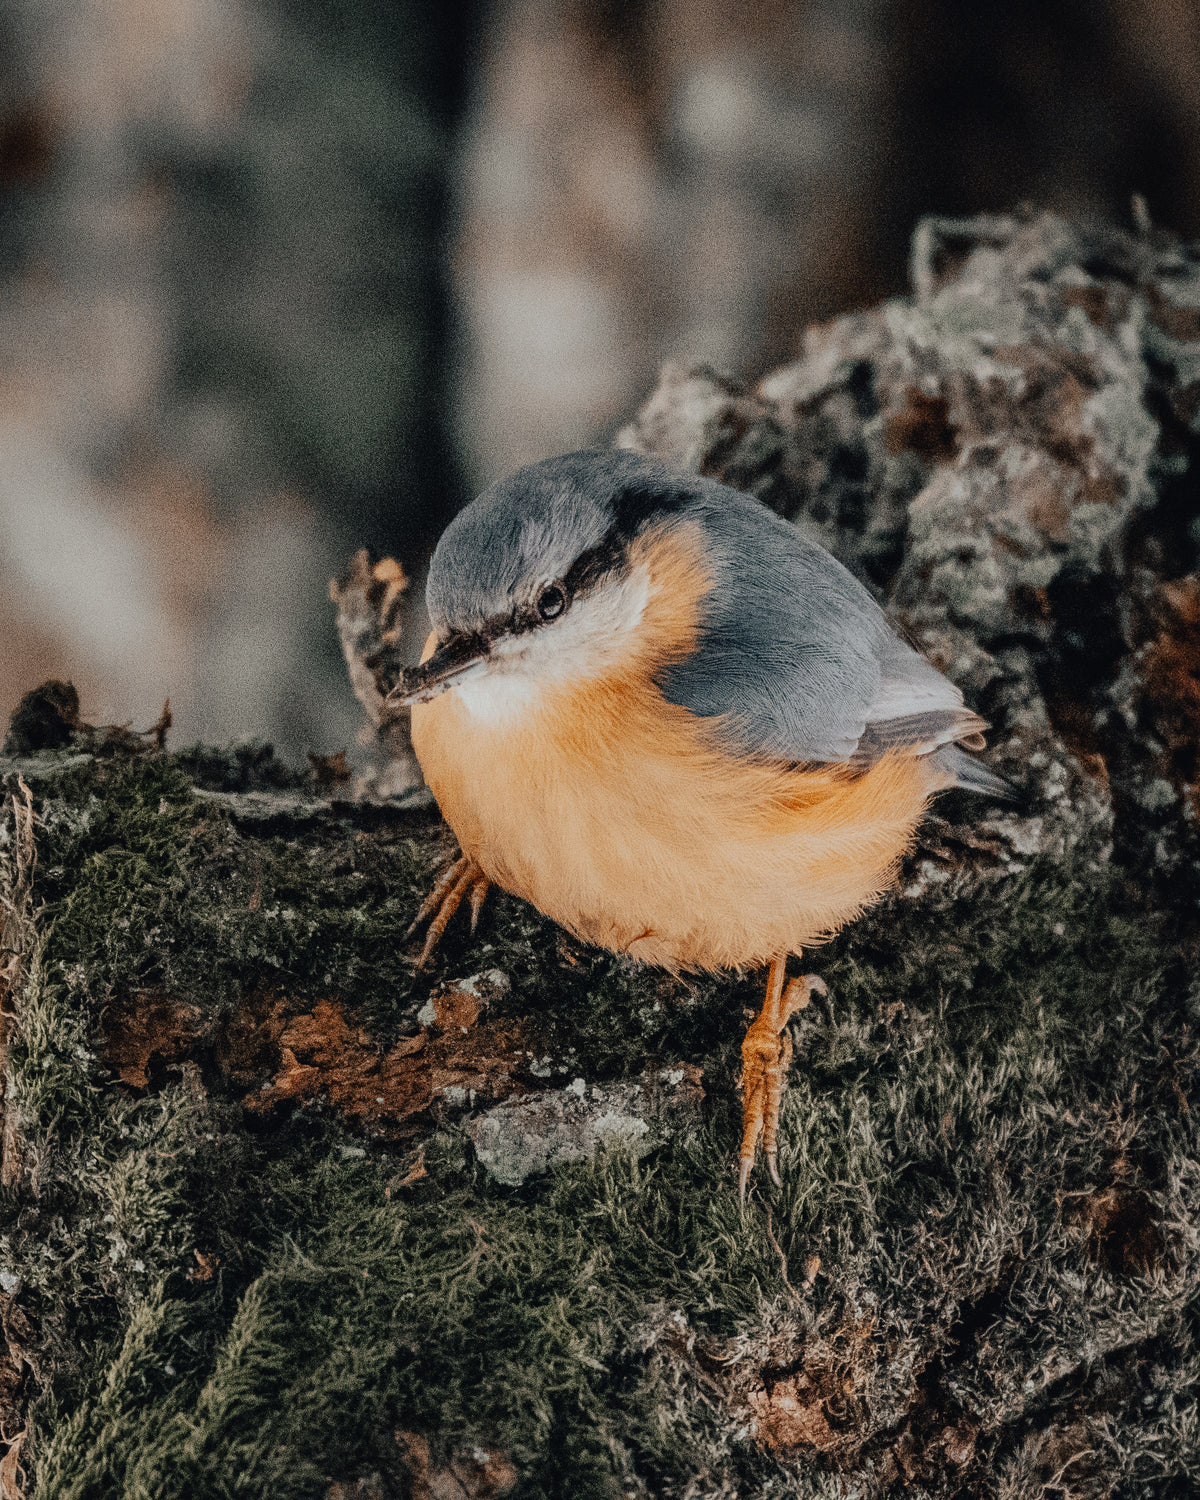 We’re Nuts for Nuthatches!